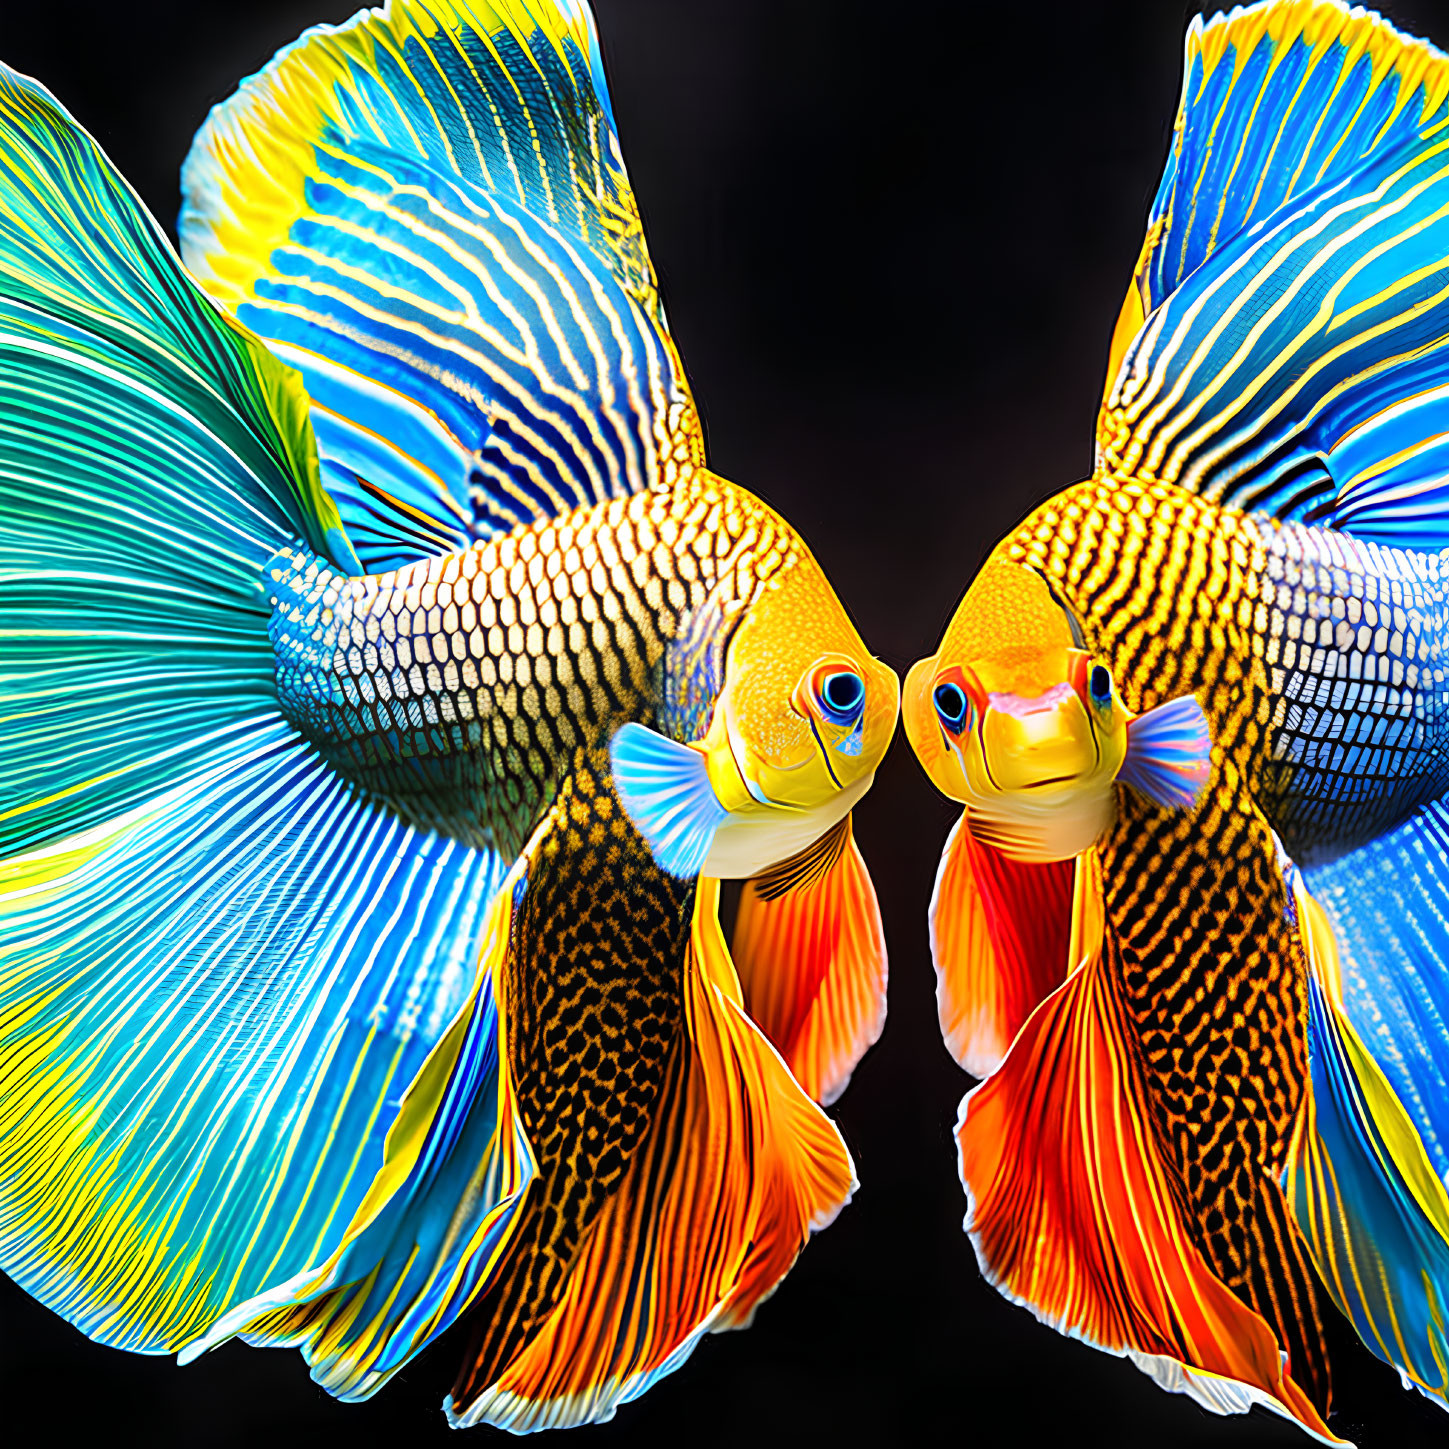 Colorful Goldfish with Vibrant Fins and Scales on Dark Background